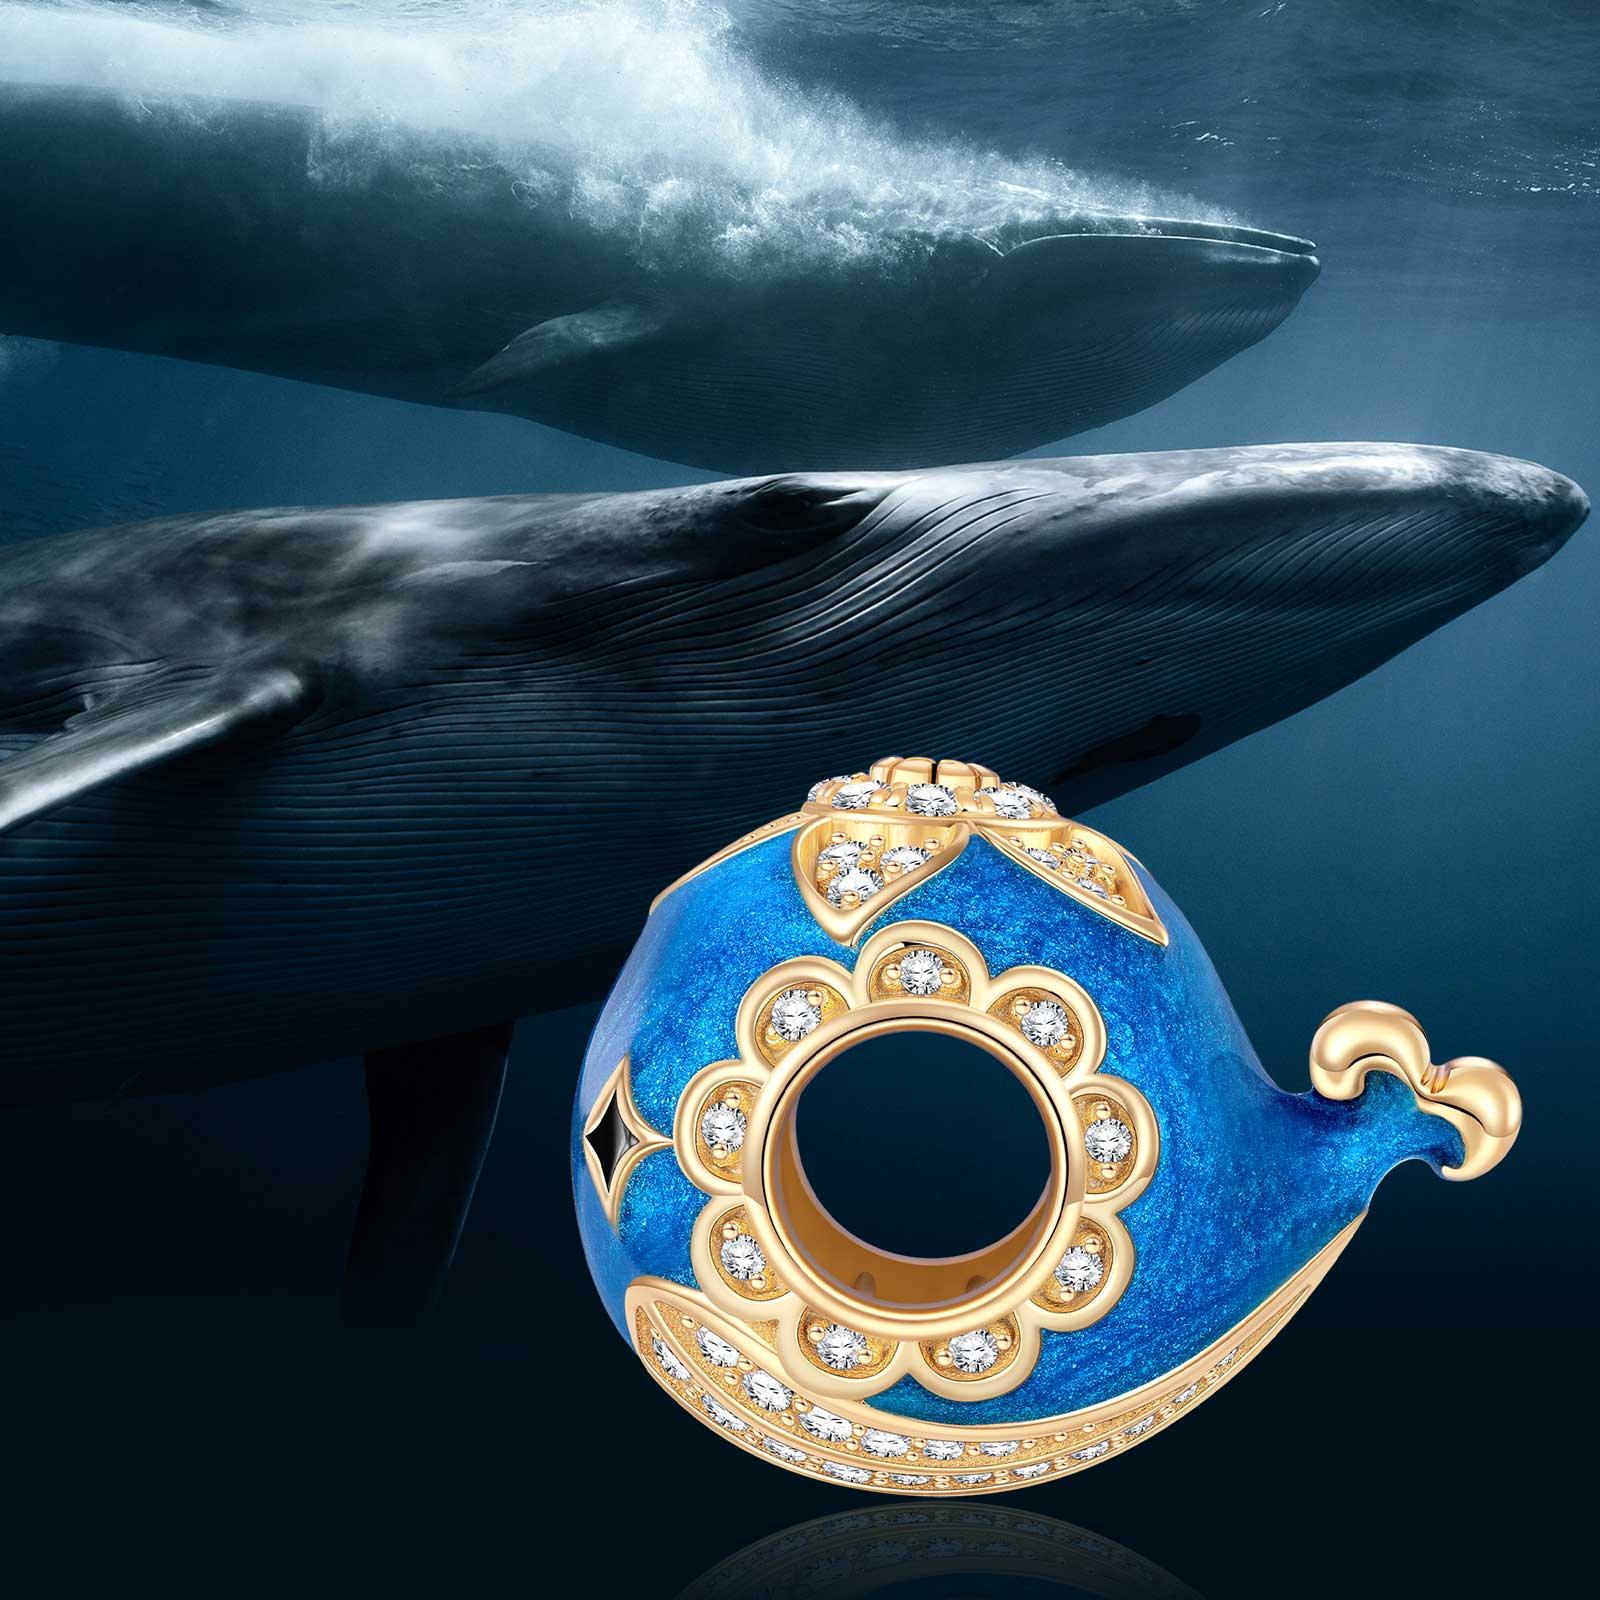 Cute Blue Whale Tarnish-resistant Silver Charms With Enamel In 14K Gold Plated